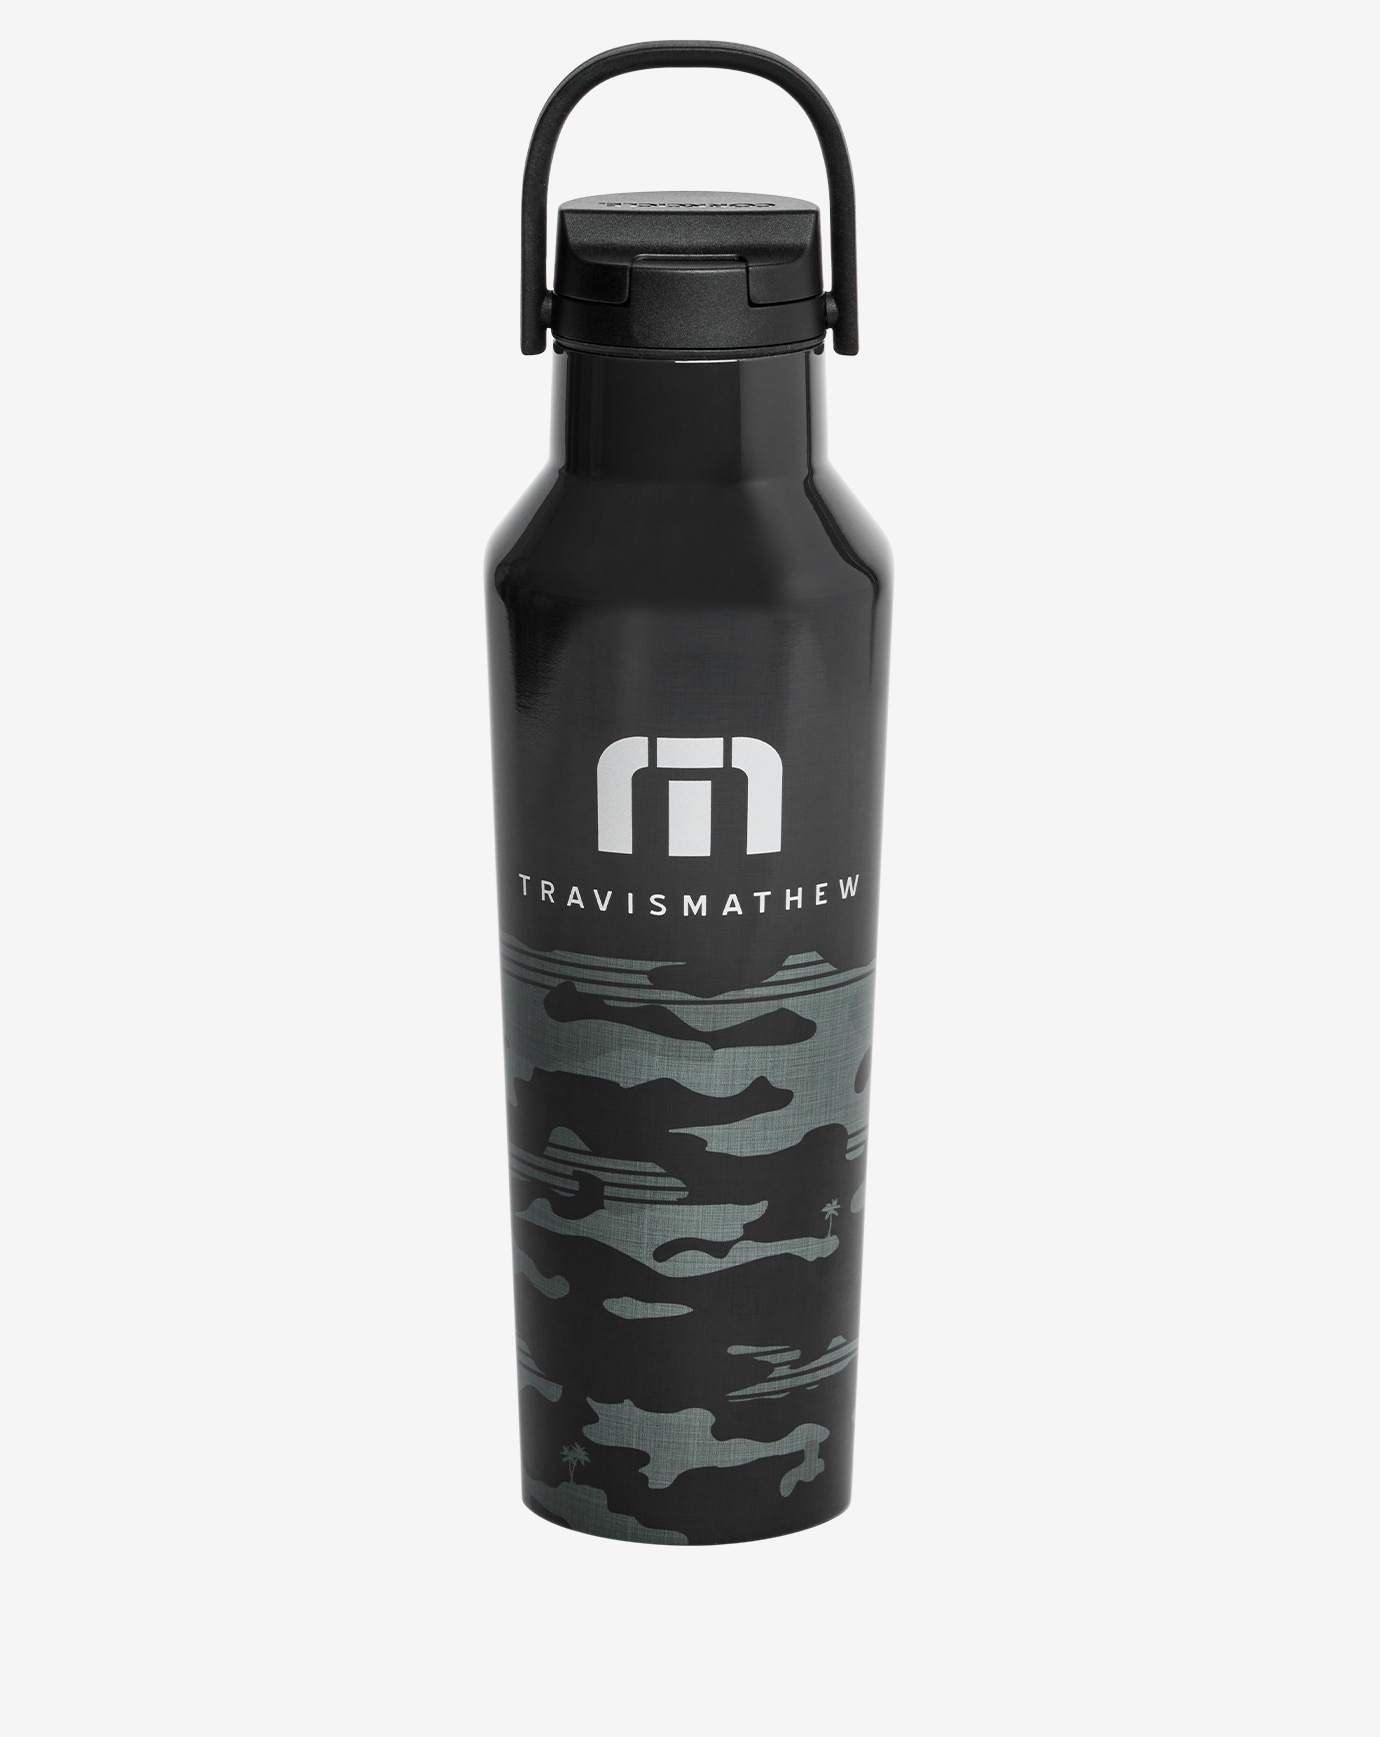 Related Product - CAMO SPORT CANTEEN